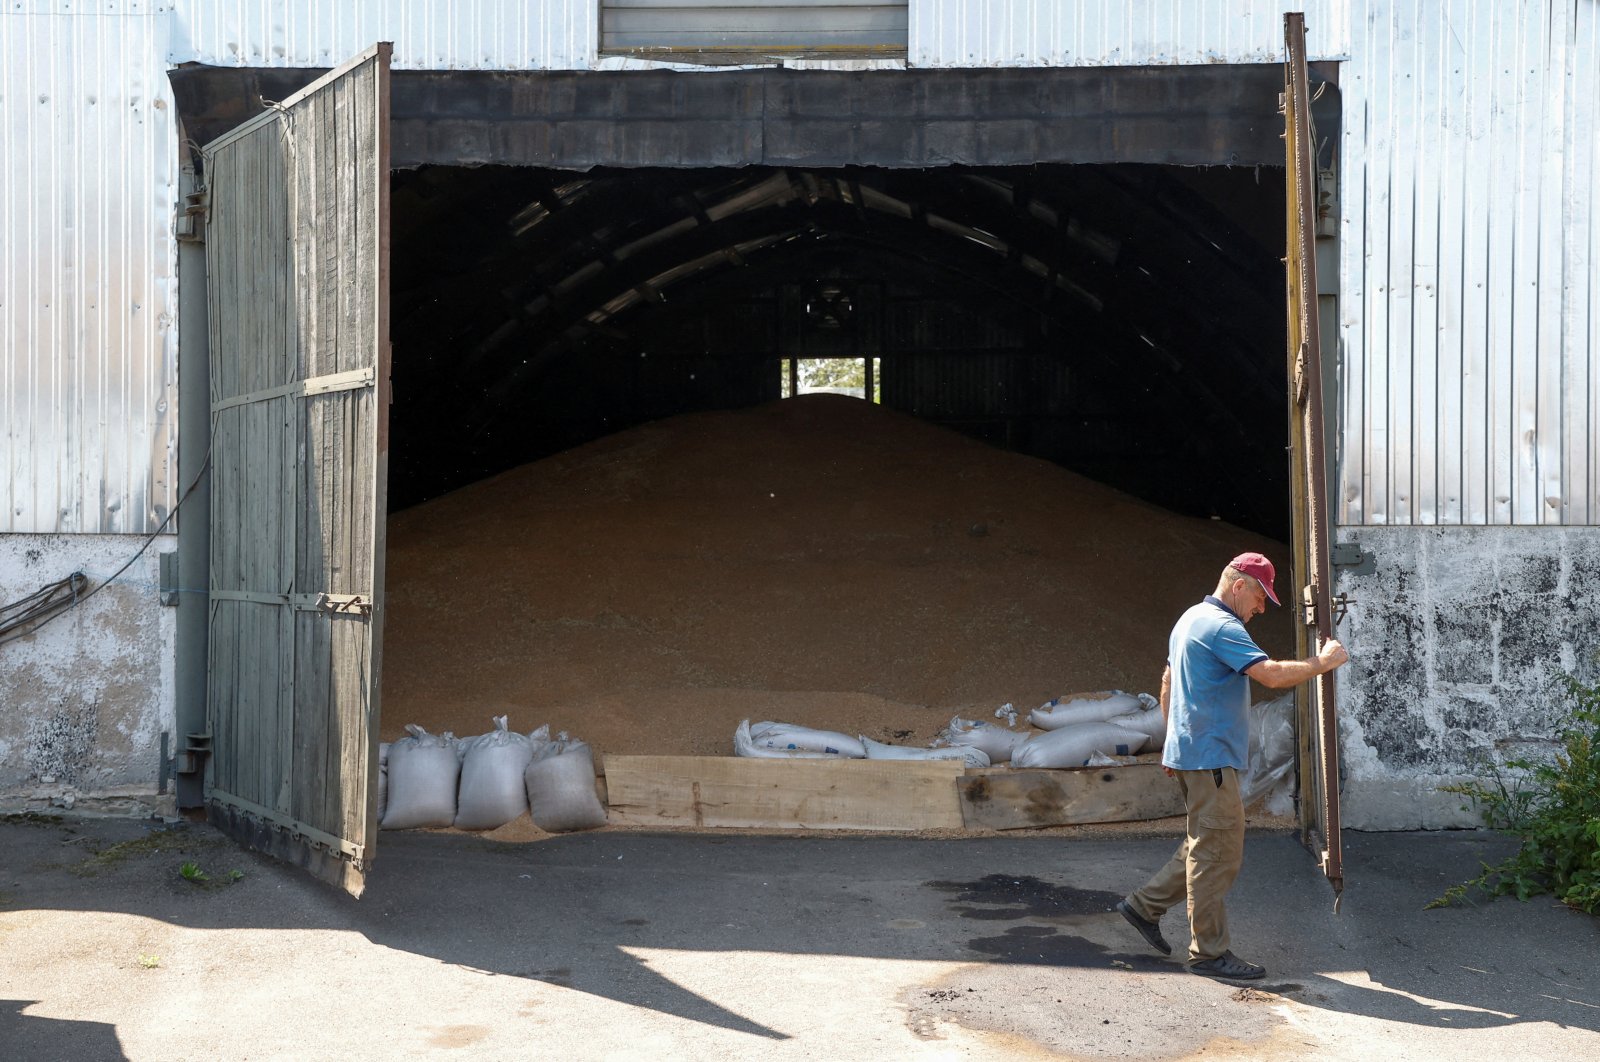 A farmer opens the gate of a wheat grain storage in the village of Khreshchate, in the Chernihiv region, Ukraine, July 5, 2022. (Reuters Photo)